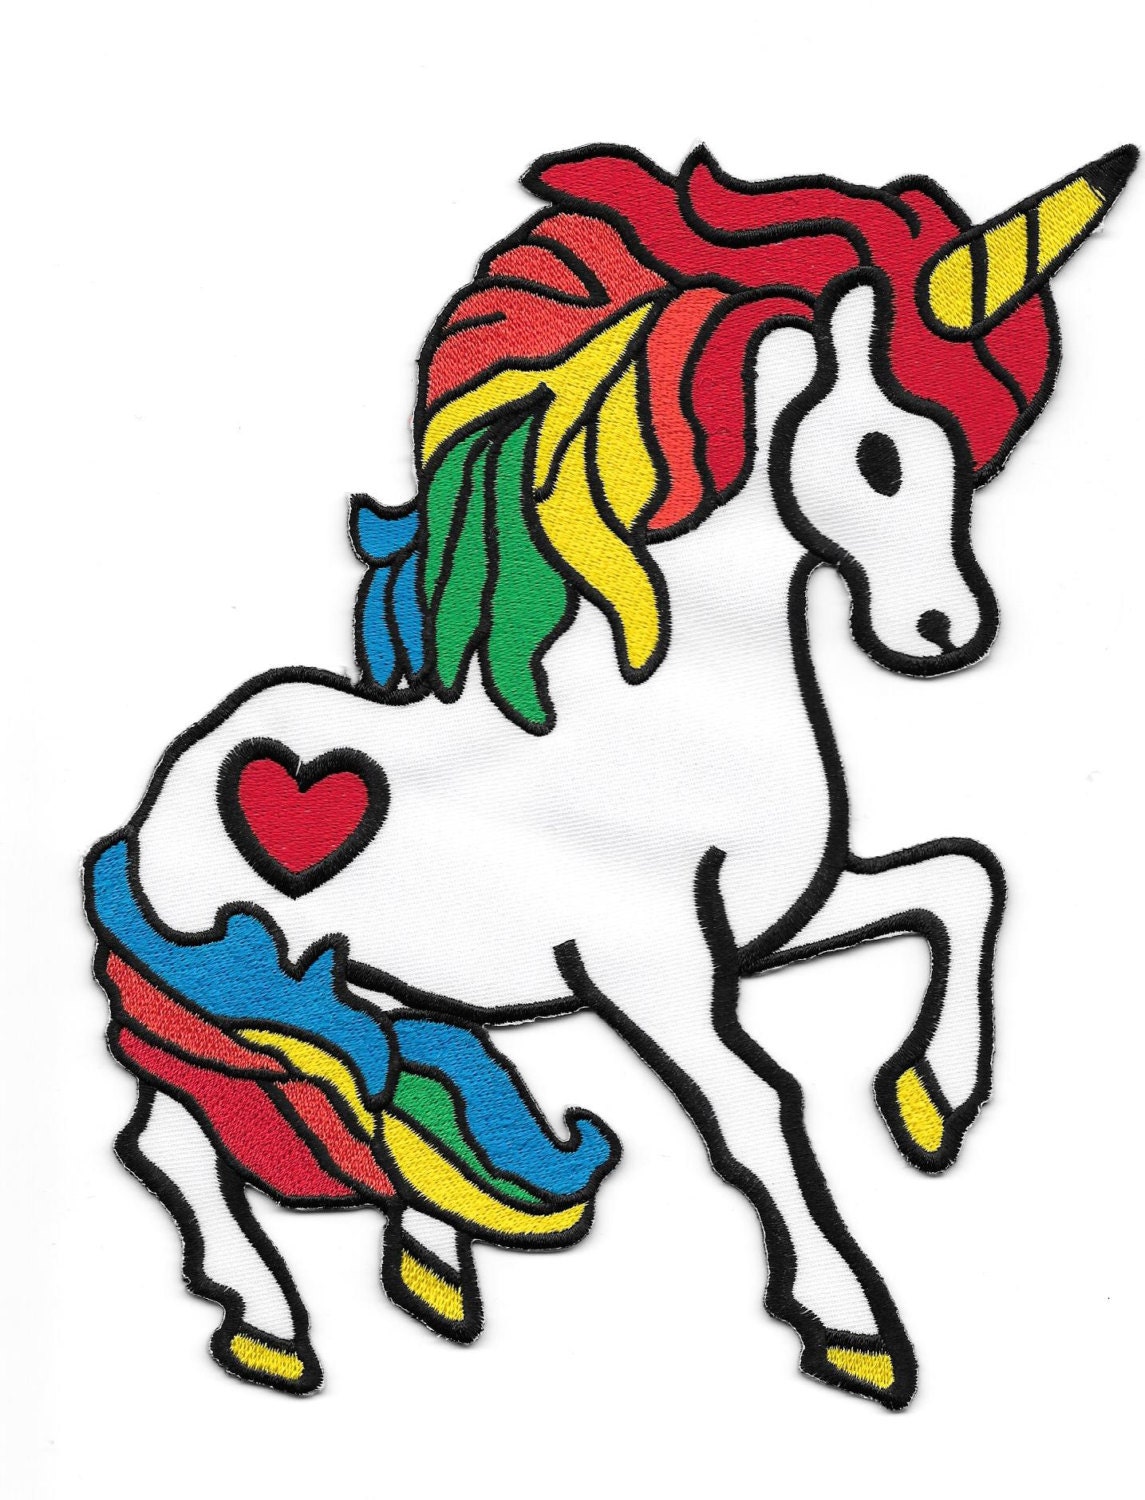 Download Unicorn Rainbow with Heart Tattoo Embroidered Large